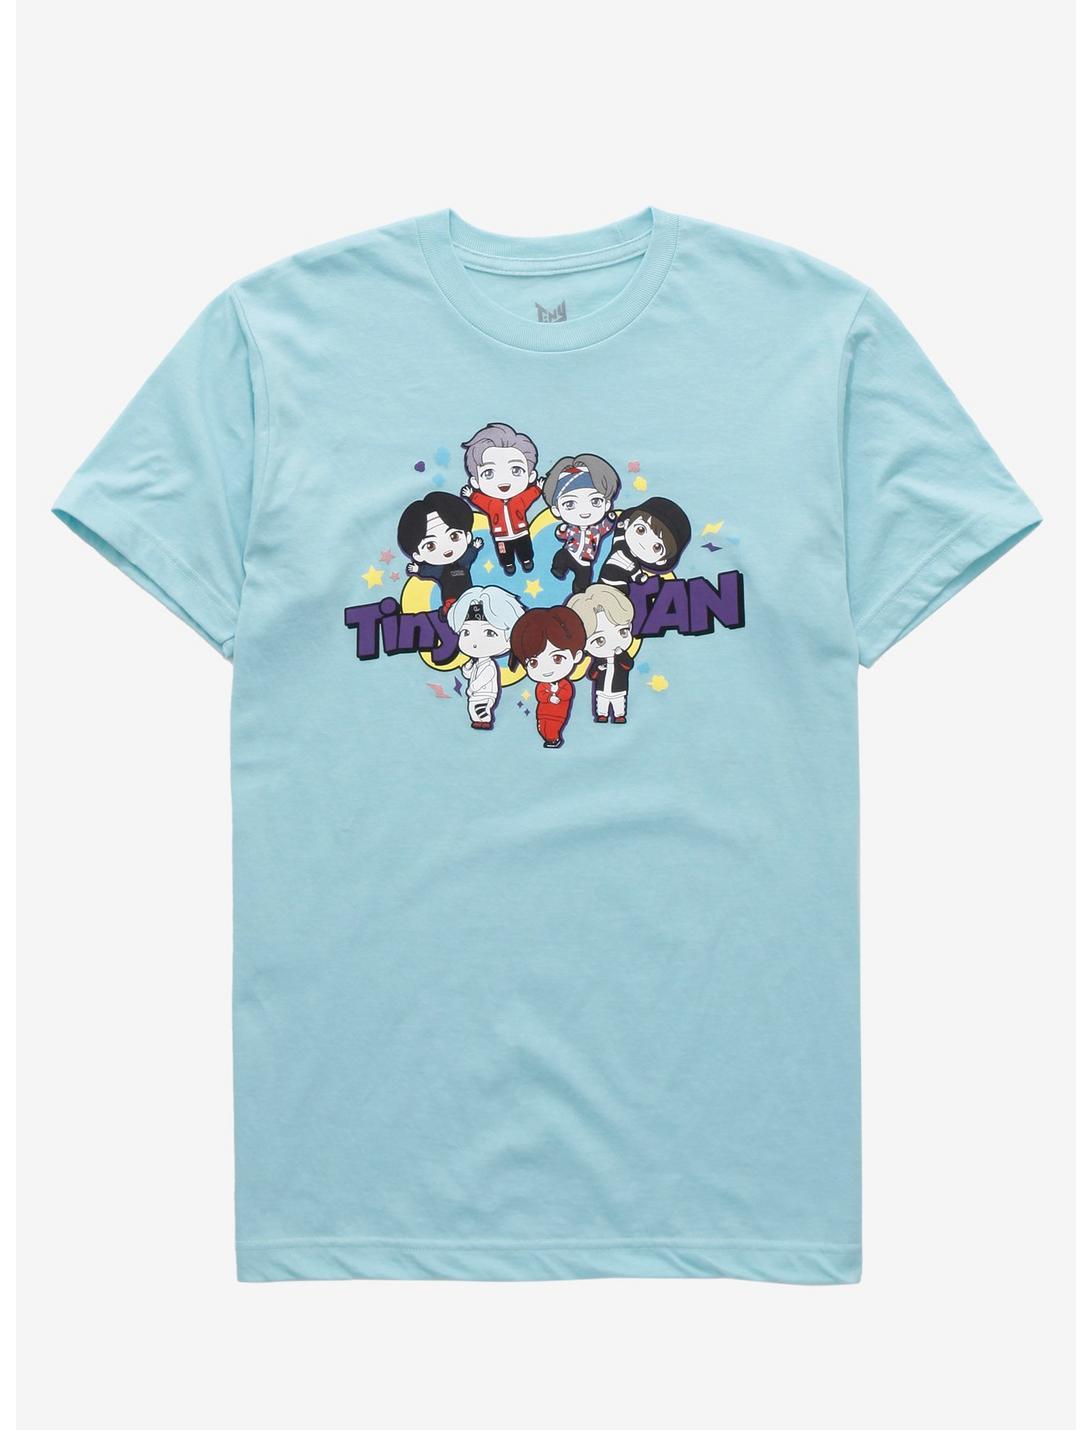 TinyTAN Character Turquoise T-Shirt Inspired By BTS, BLUE, hi-res